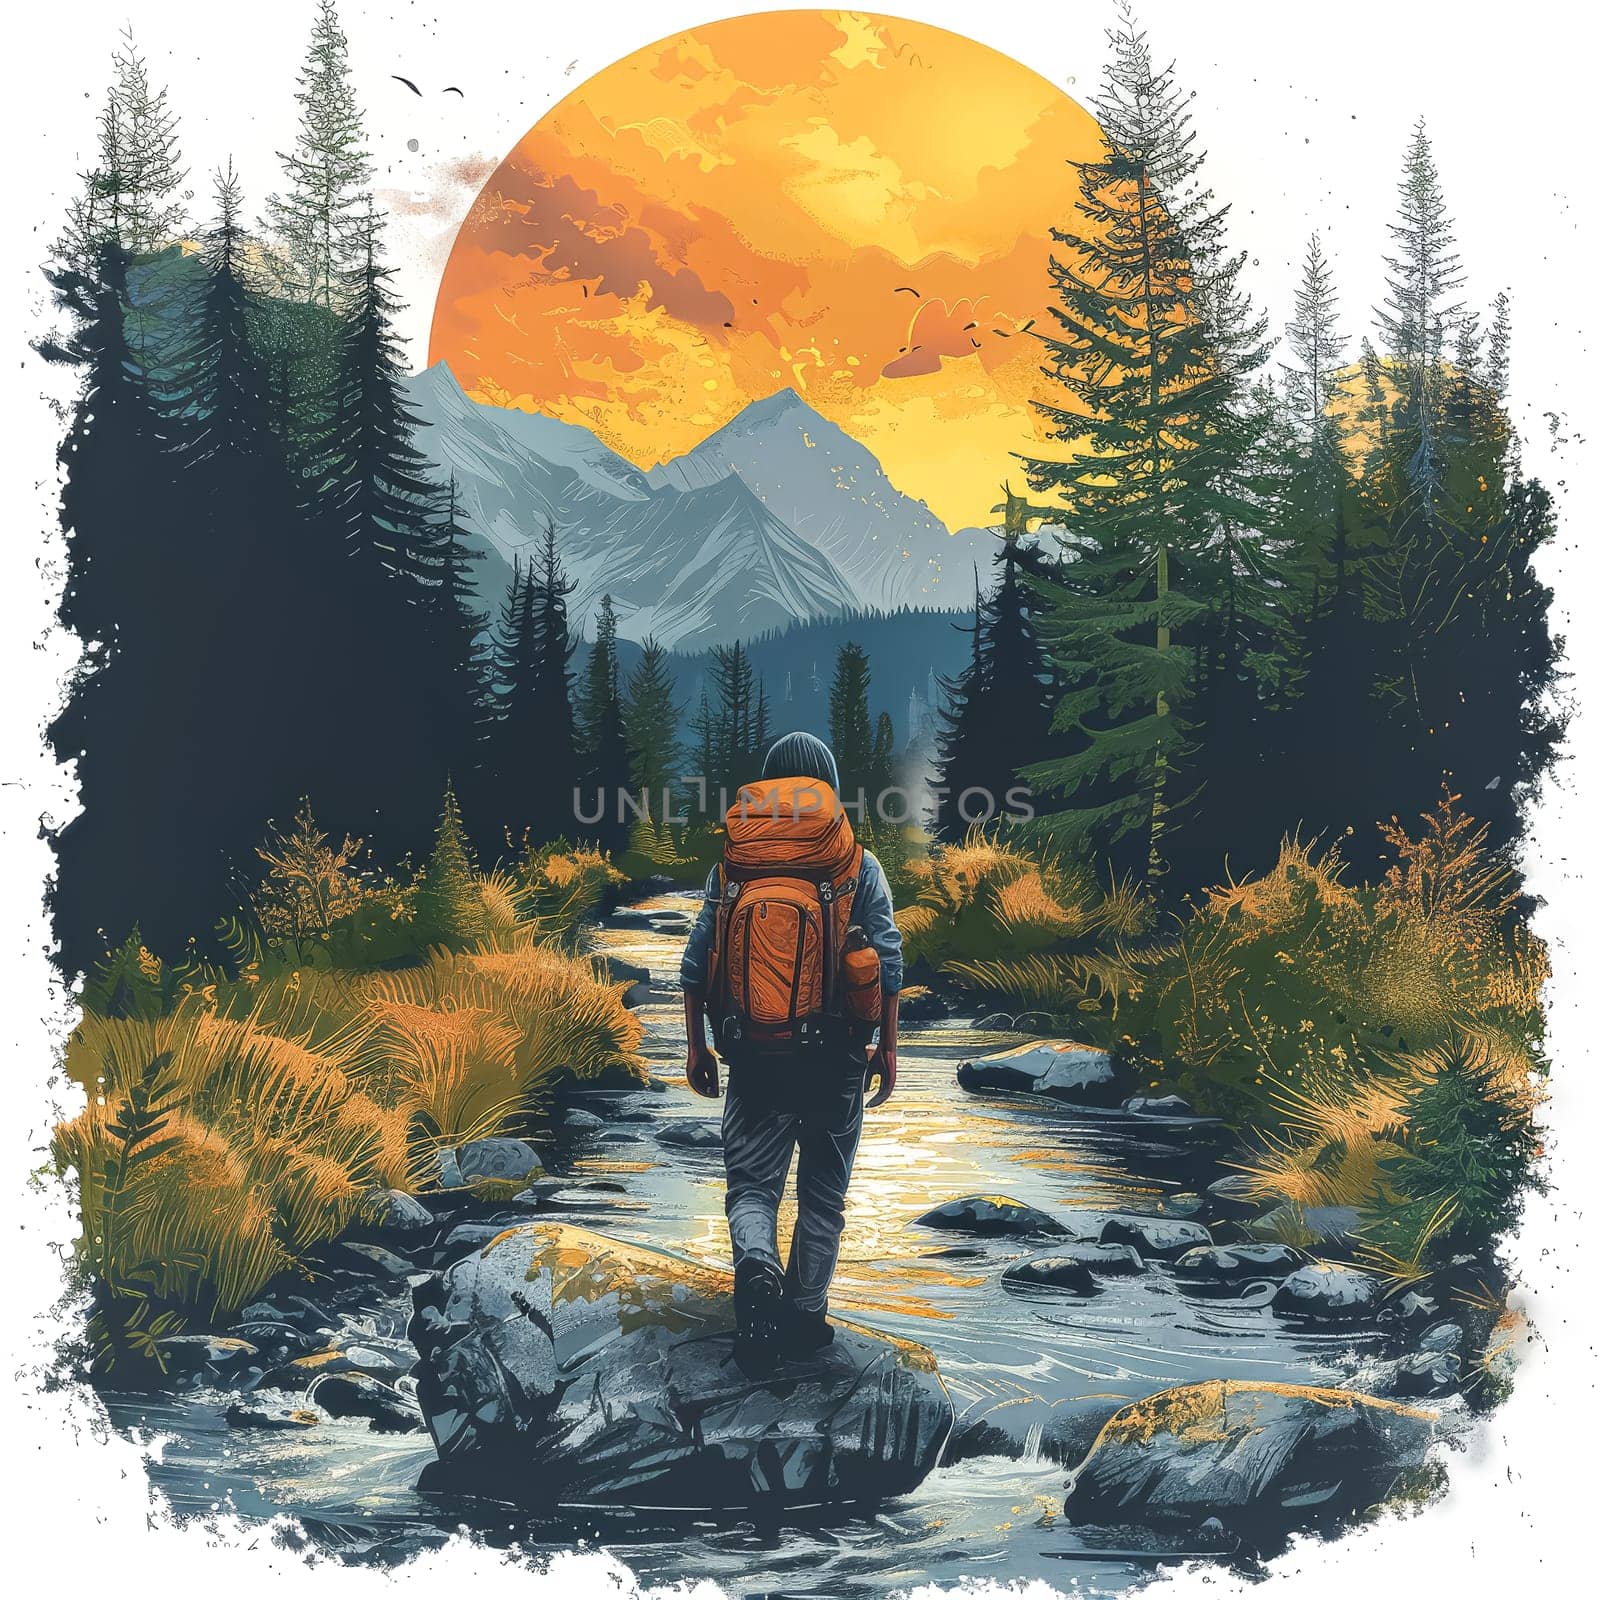 A man is walking along a river with a mountain in the background. The scene is serene and peaceful, with the man carrying a backpack and the mountain providing a sense of grandeur and majesty